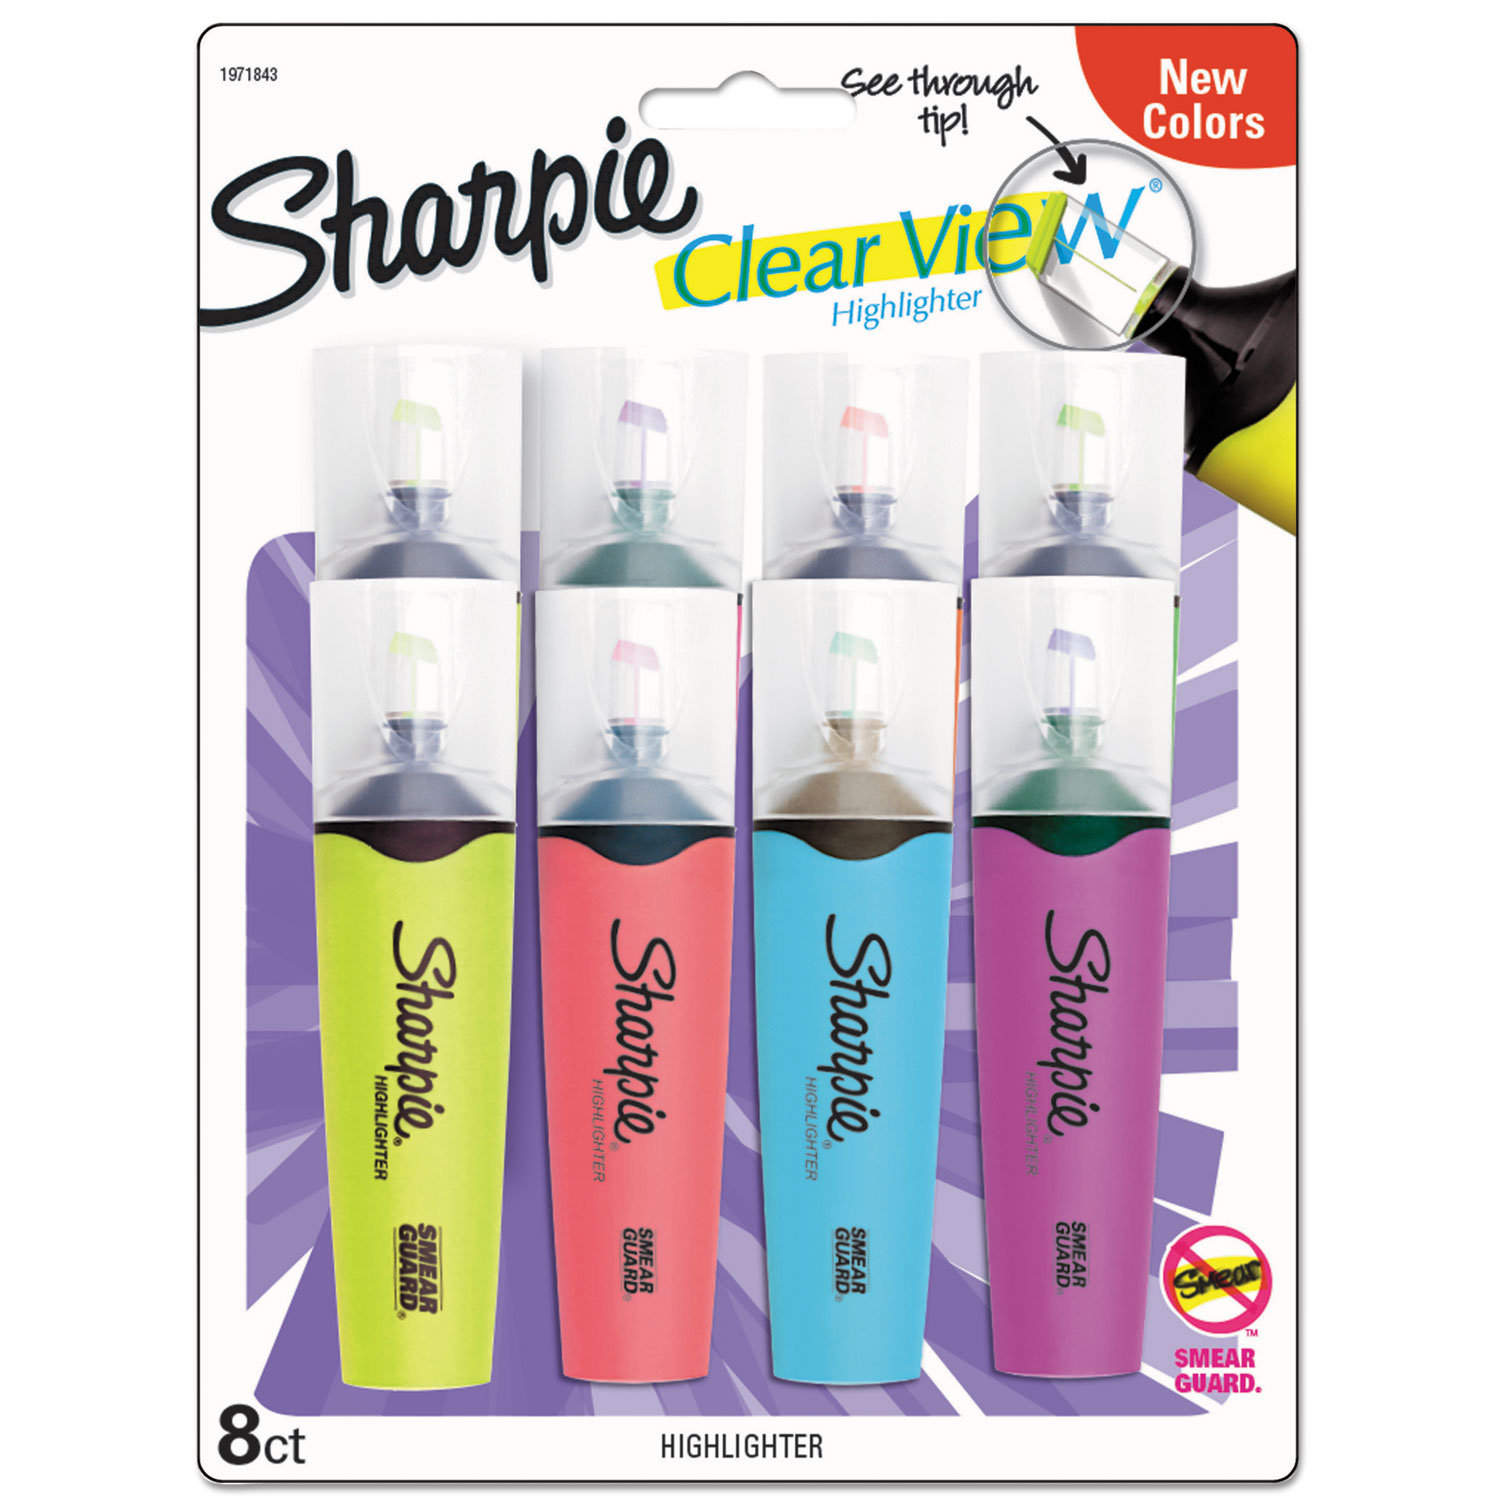  Sharpie 1971843 Clearview Tank-Style Highlighter, Chisel Tip, Assorted Colors, 8/Set (SAN1971843) 